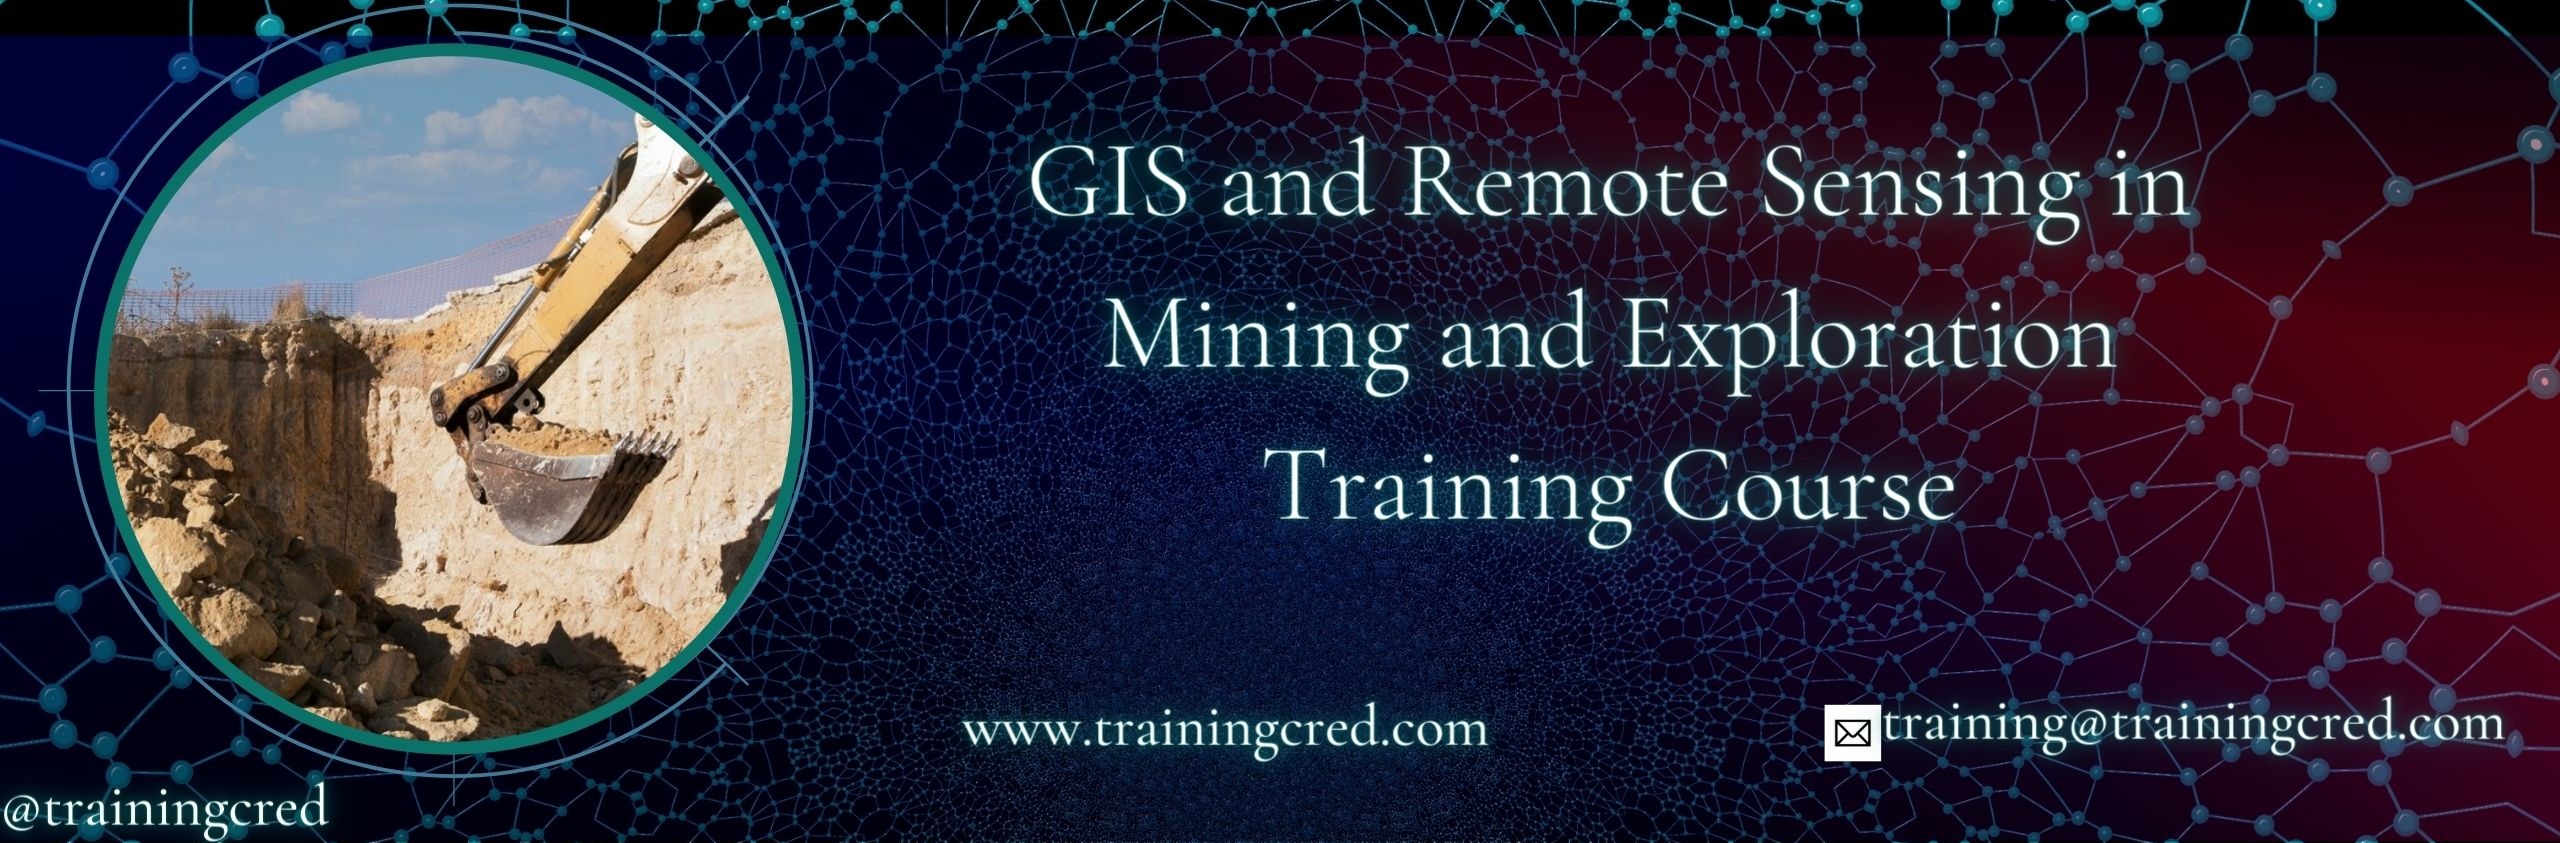 GIS and Remote Sensing in Mining and Exploration Training